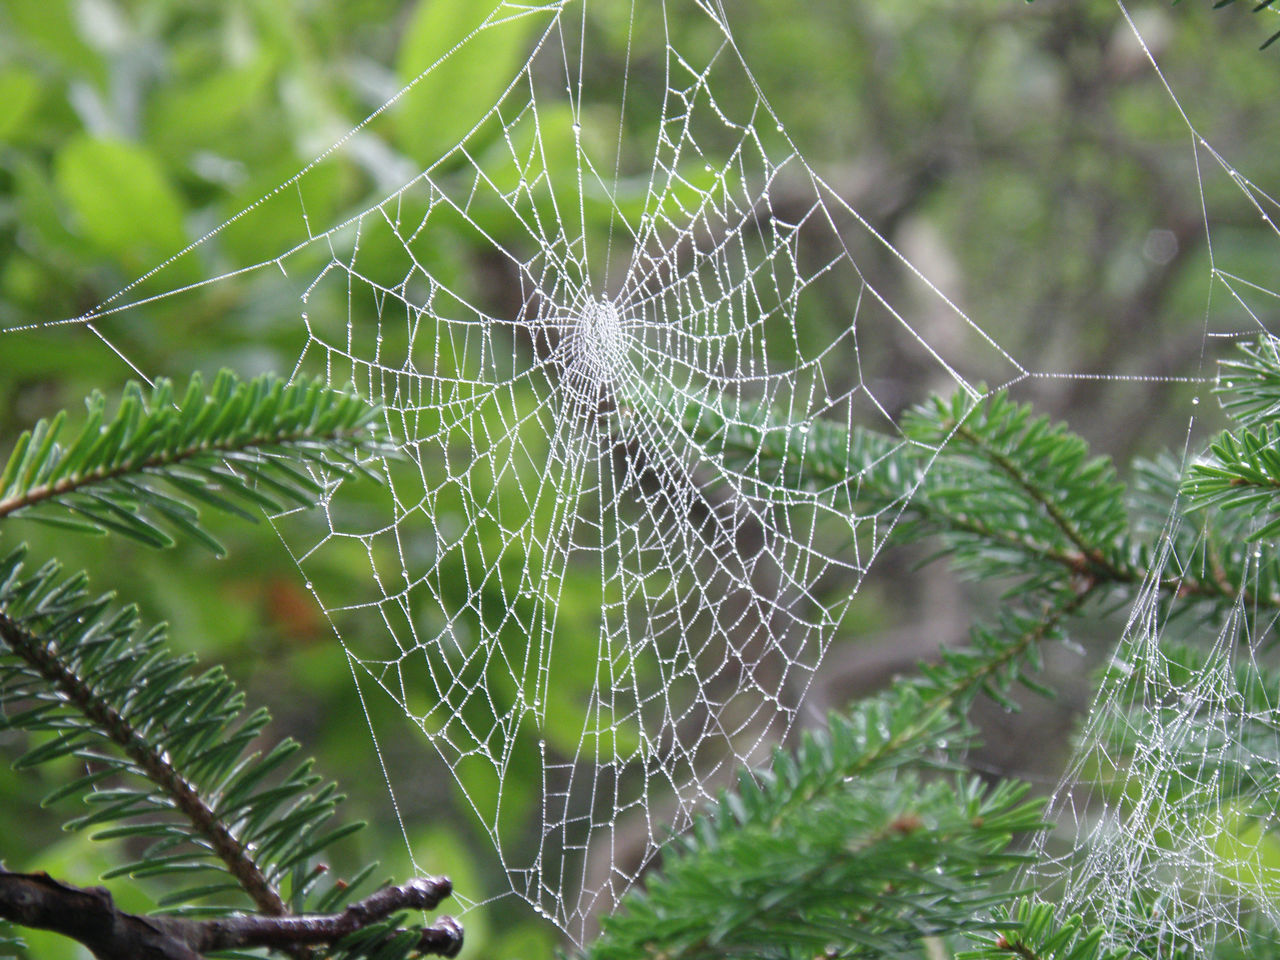 spider web, fragility, close-up, nature, plant, focus on foreground, animal, no people, wet, beauty in nature, spider, drop, animal themes, day, outdoors, complexity, water, green, pattern, dew, tree, intricacy, environment, selective focus, tranquility, leaf, plant part, rain, arachnid, forest, land, animal wildlife, growth